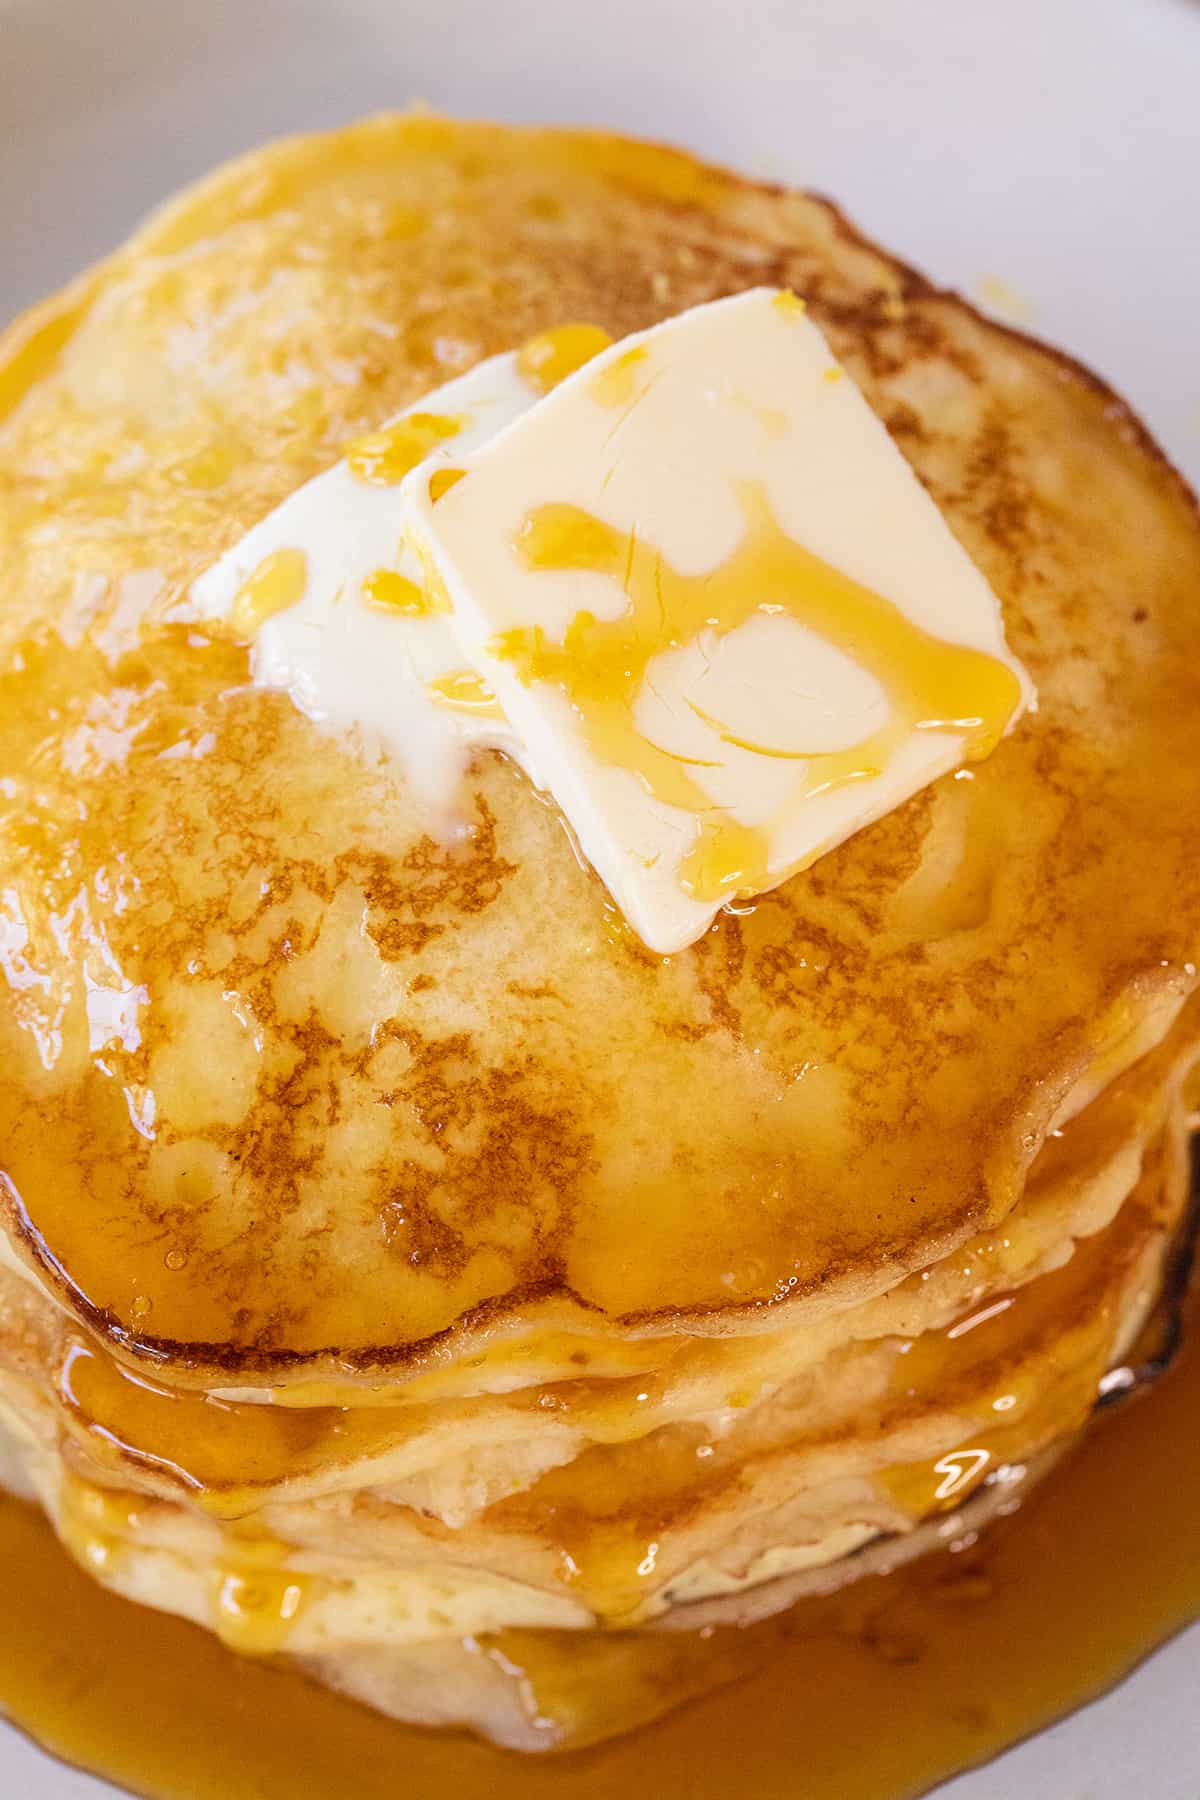 Lemon pancakes with butter and syrup.